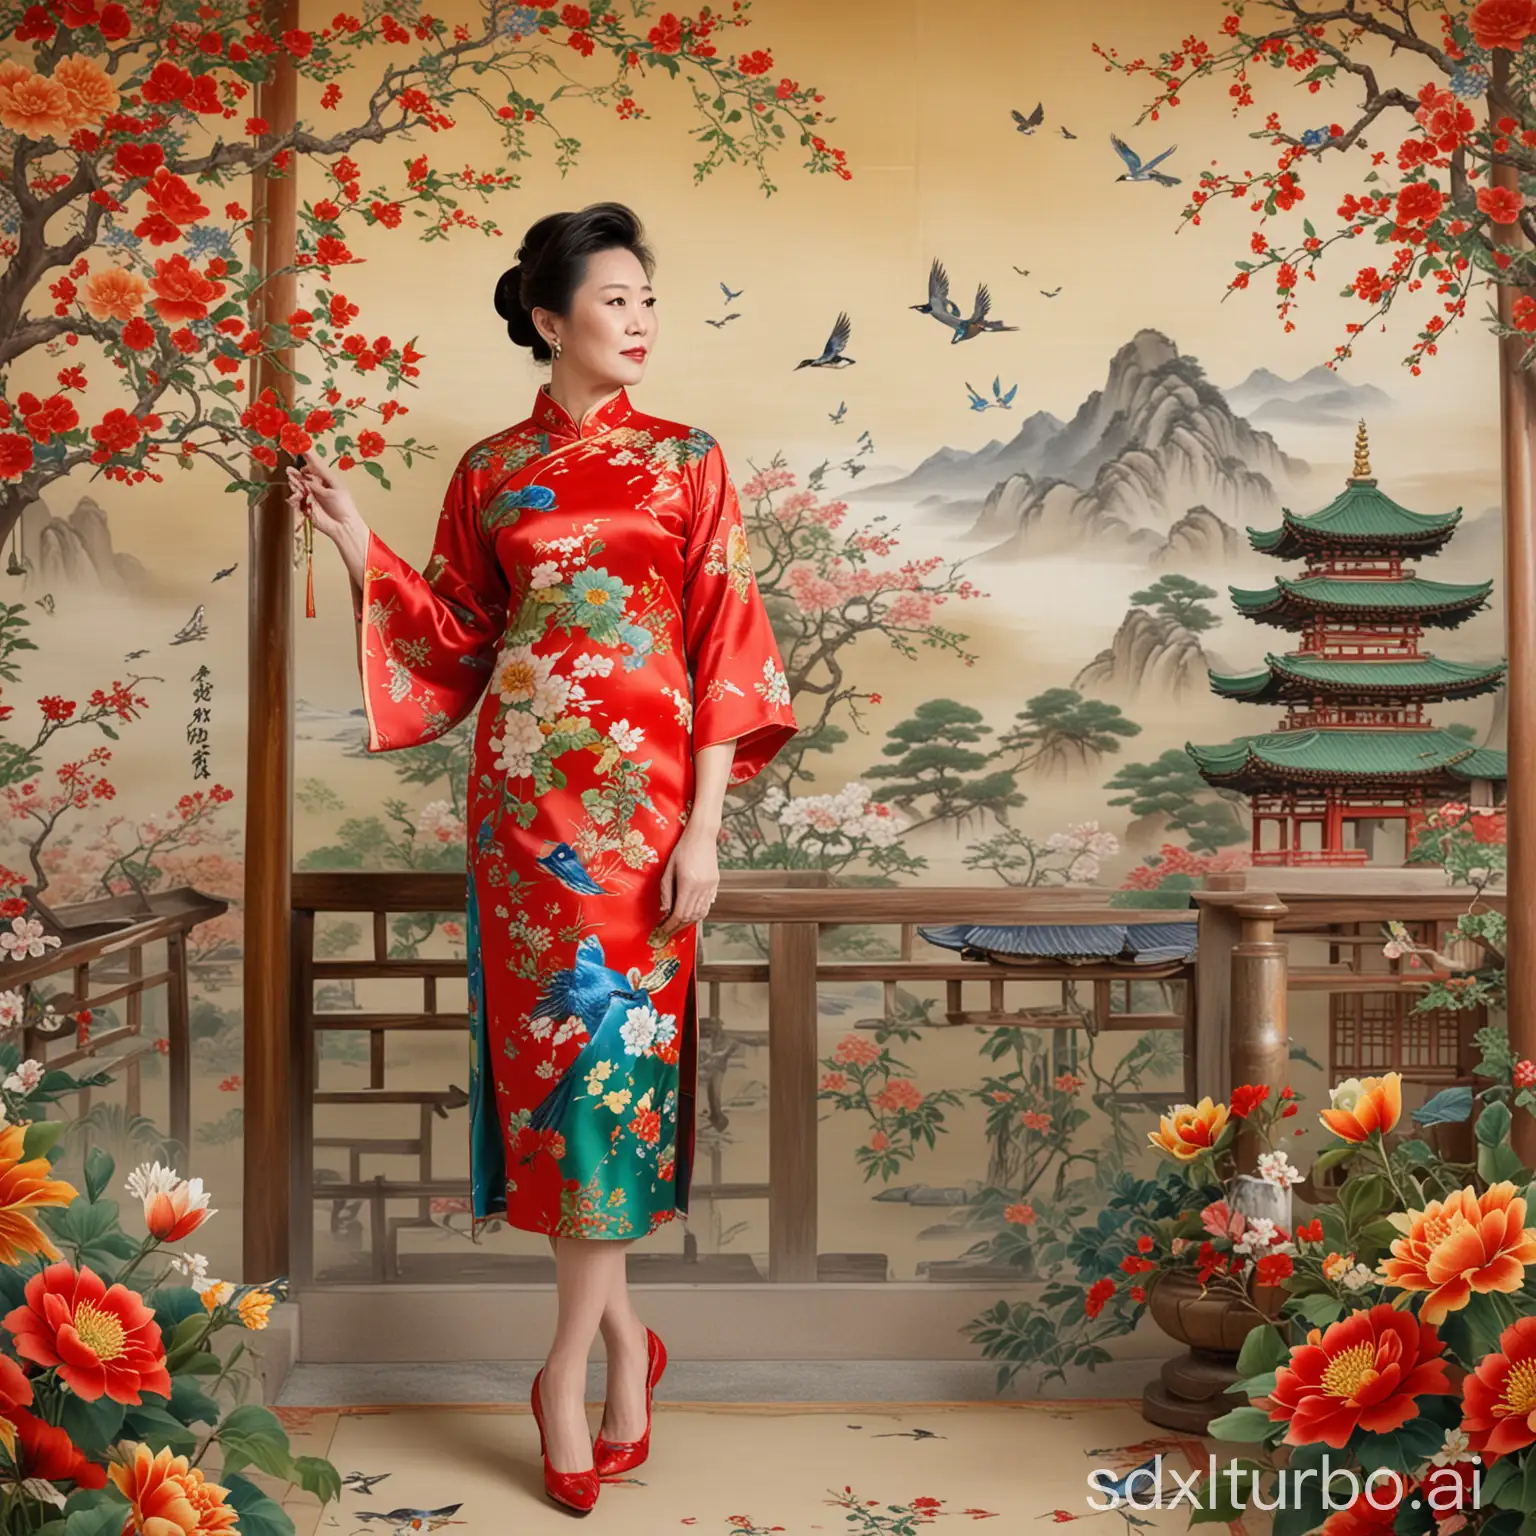 An elegant and noble middle-aged woman is wearing a colorful cheongsam in red, green, yellow, blue, etc. The fabric is silk, and the pattern is flowers and birds. She is wearing high heels and standing in the background with birds singing and flowers blooming. The background is hand-painted bright flowers, birds, and Japanese shrines.